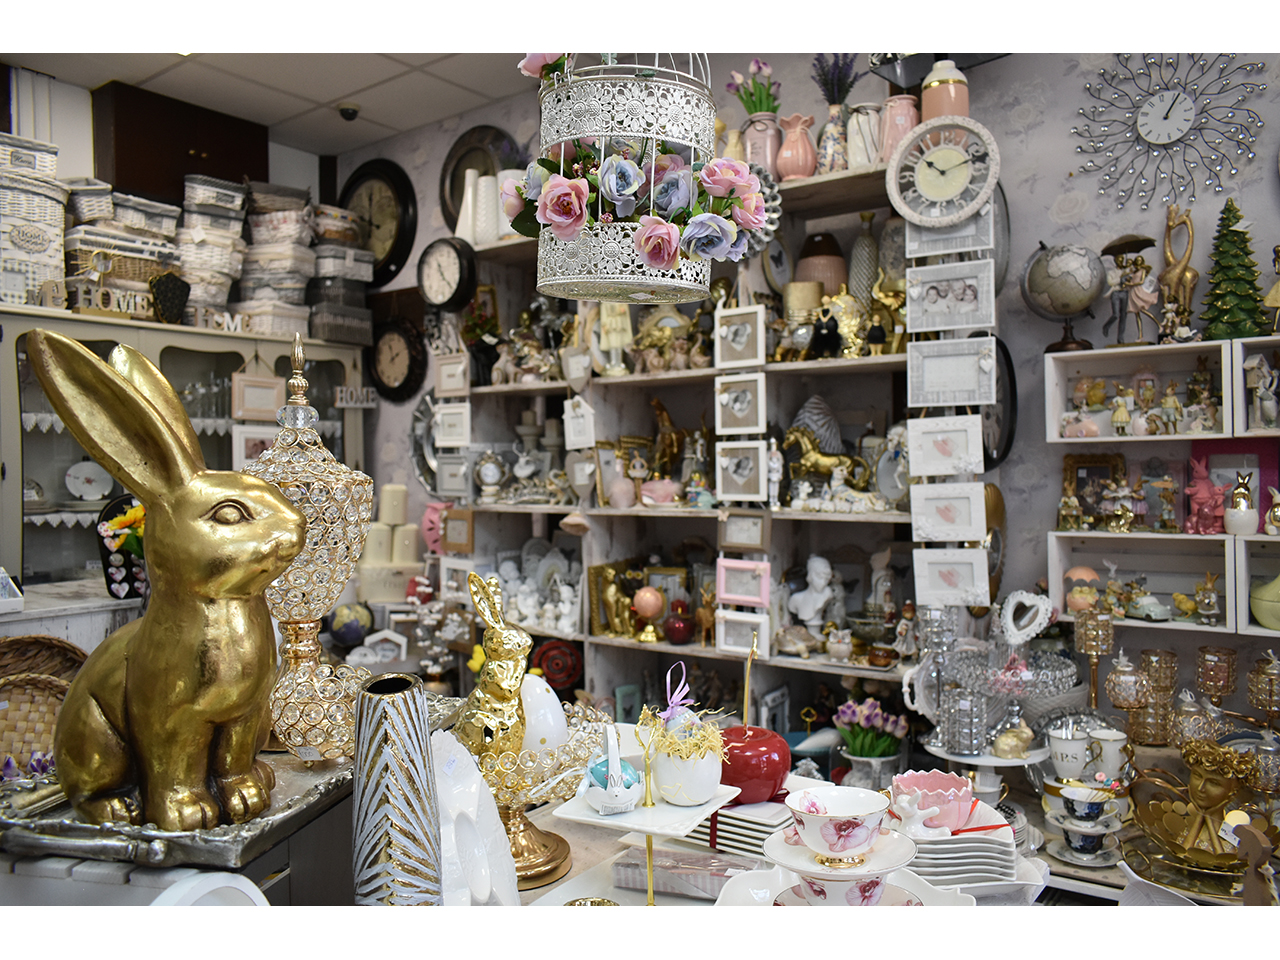 GALERY GIFT SHOP PCELICA Decoration objects Beograd